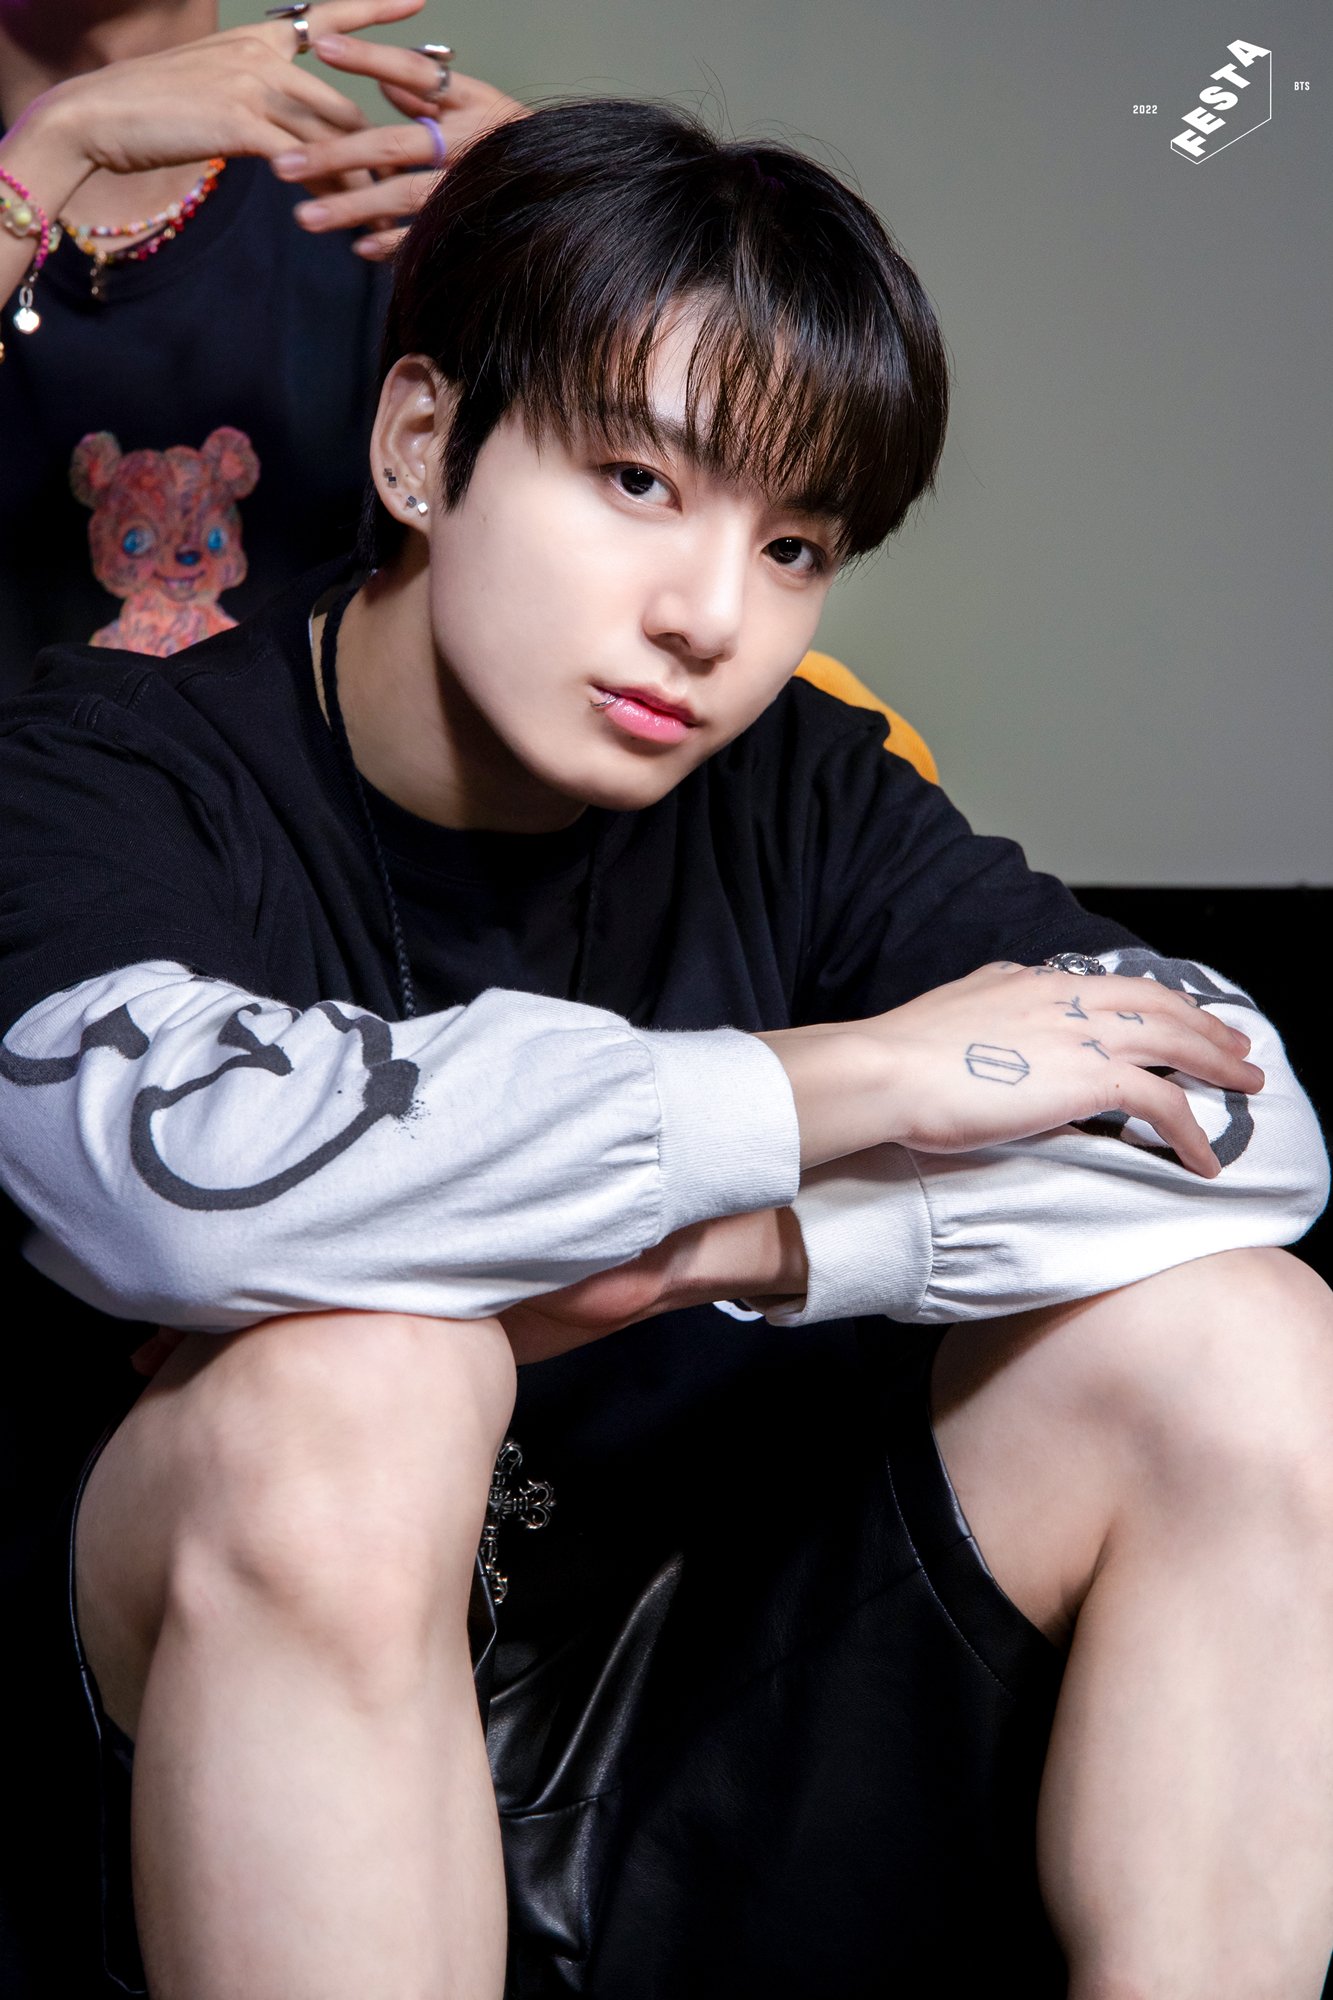 Jungkook Net Worth How Rich Is The BTS Member? IBTimes